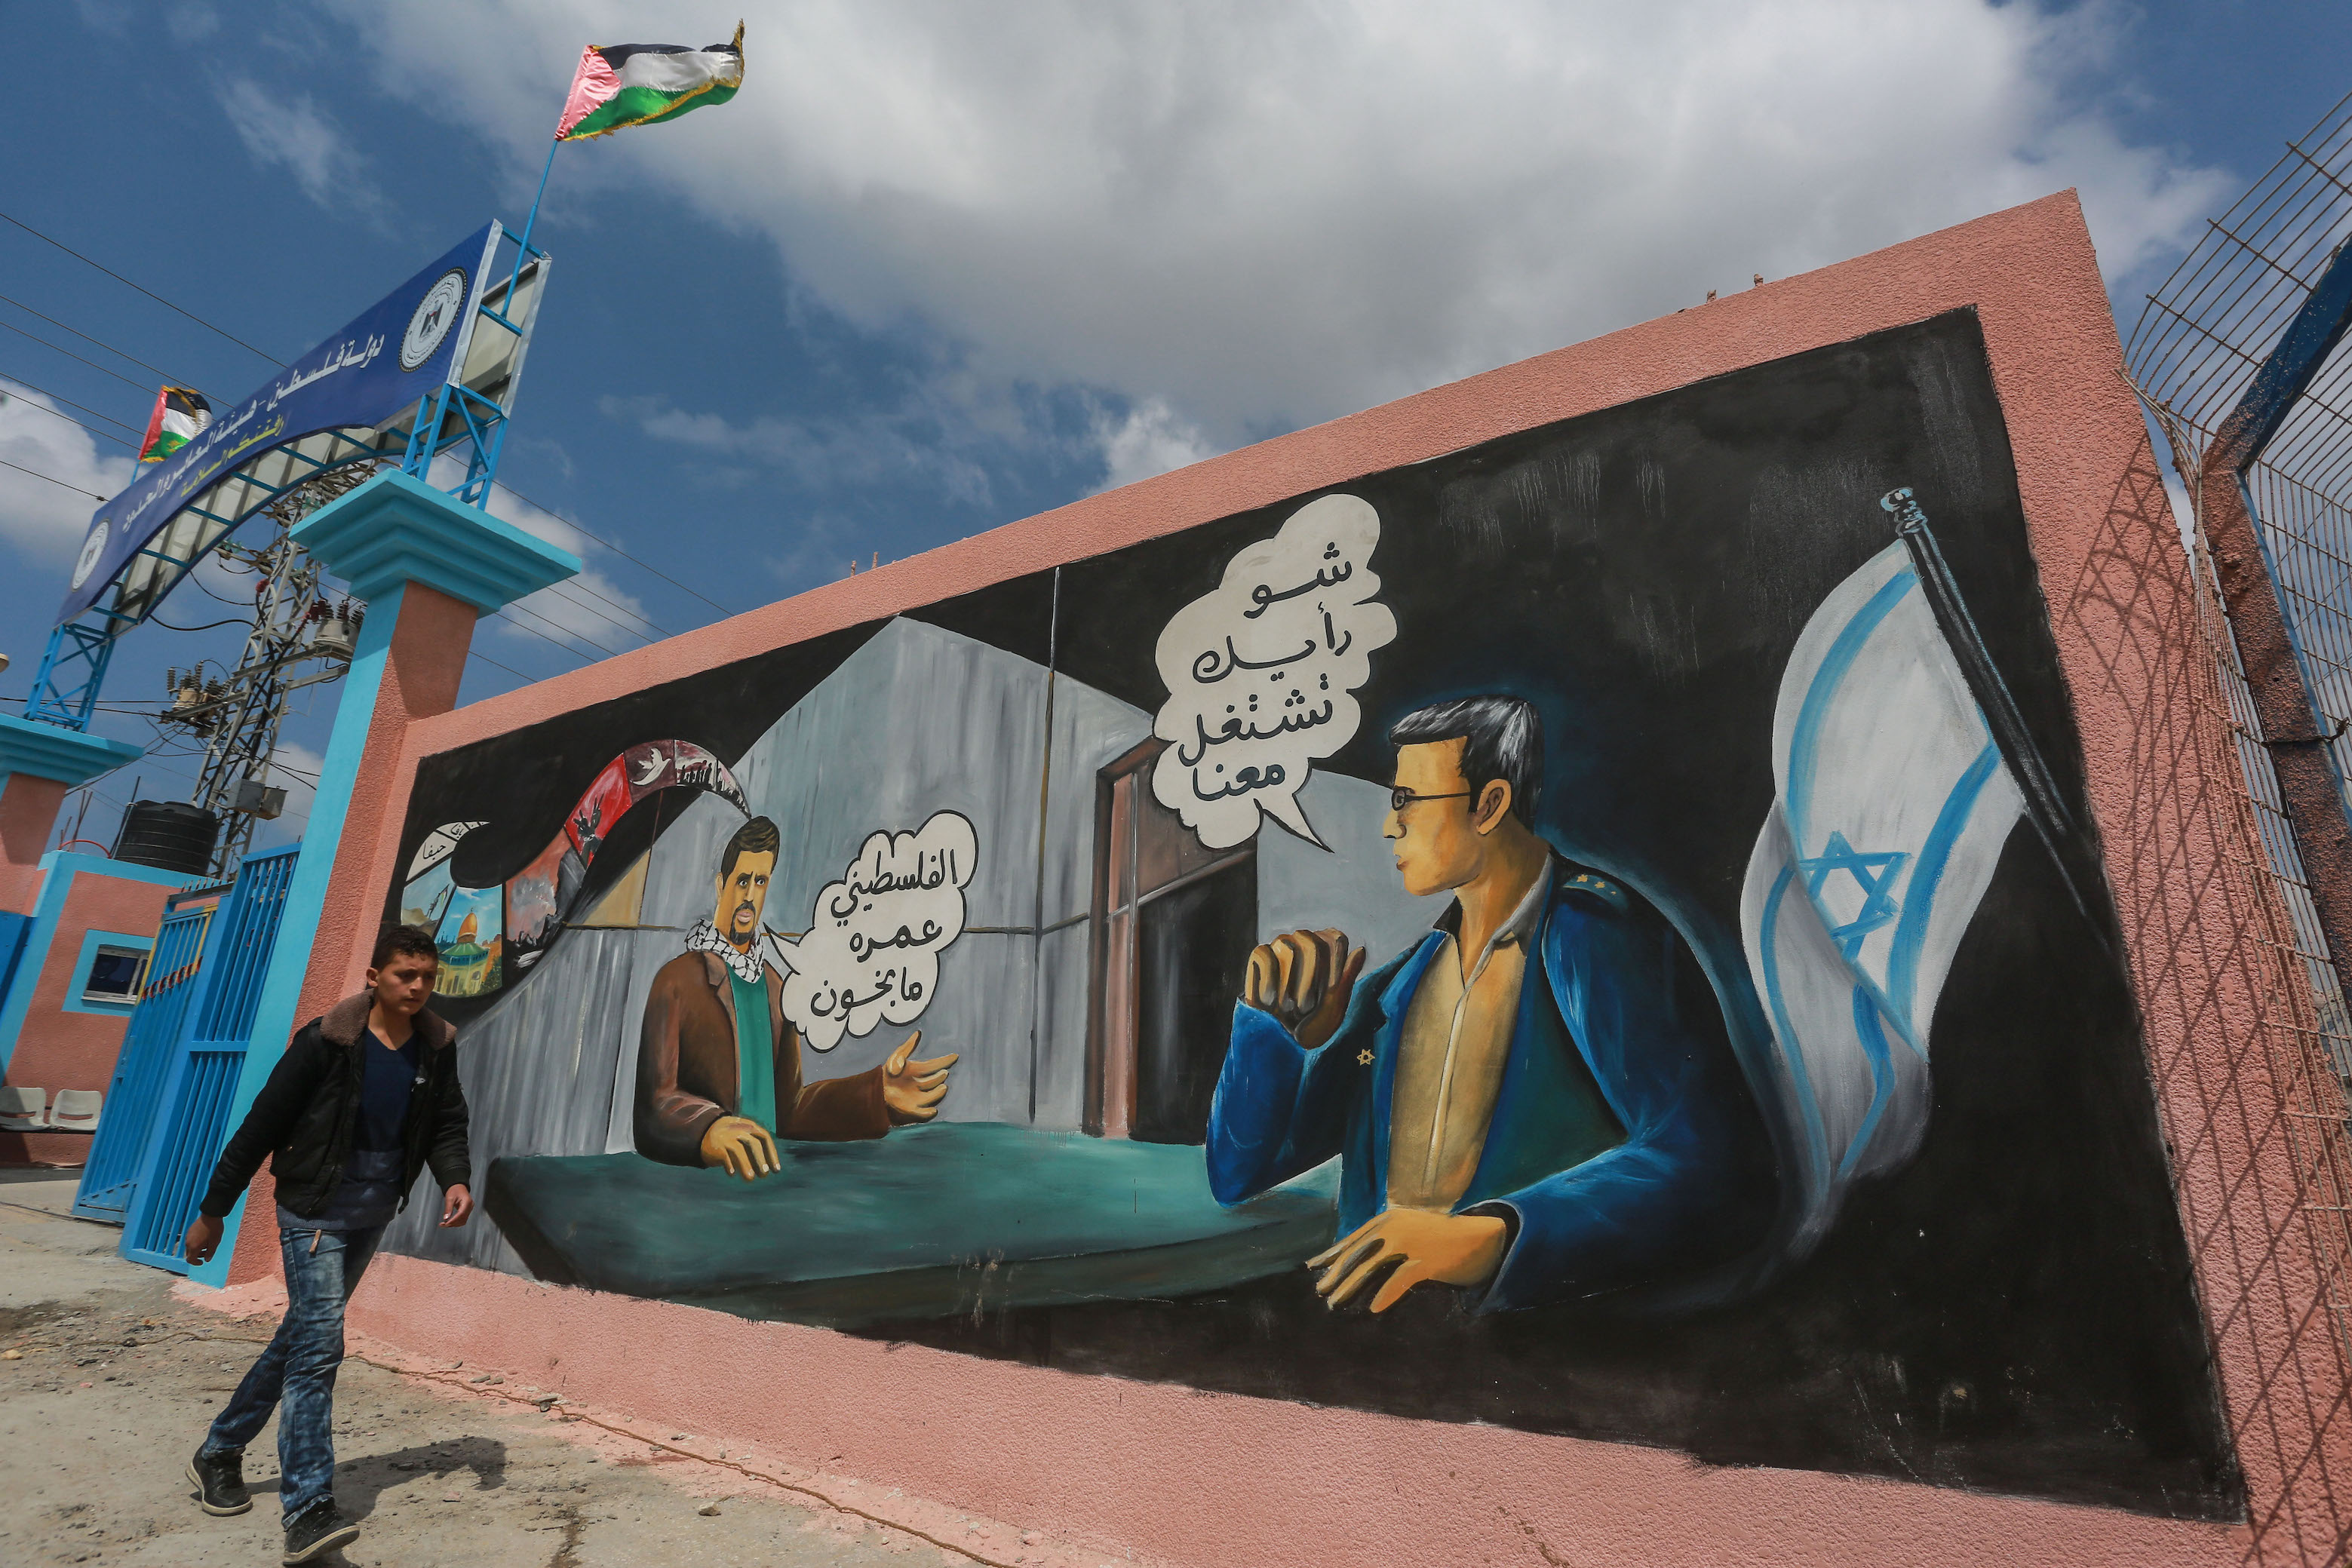 Mural near the Erez border crossing between Gaza and Israel which reads 'What do you think about working for Israel?', with the response 'The Palestinian is not a traitor' (Mohammed al-Hajjar/MEE)